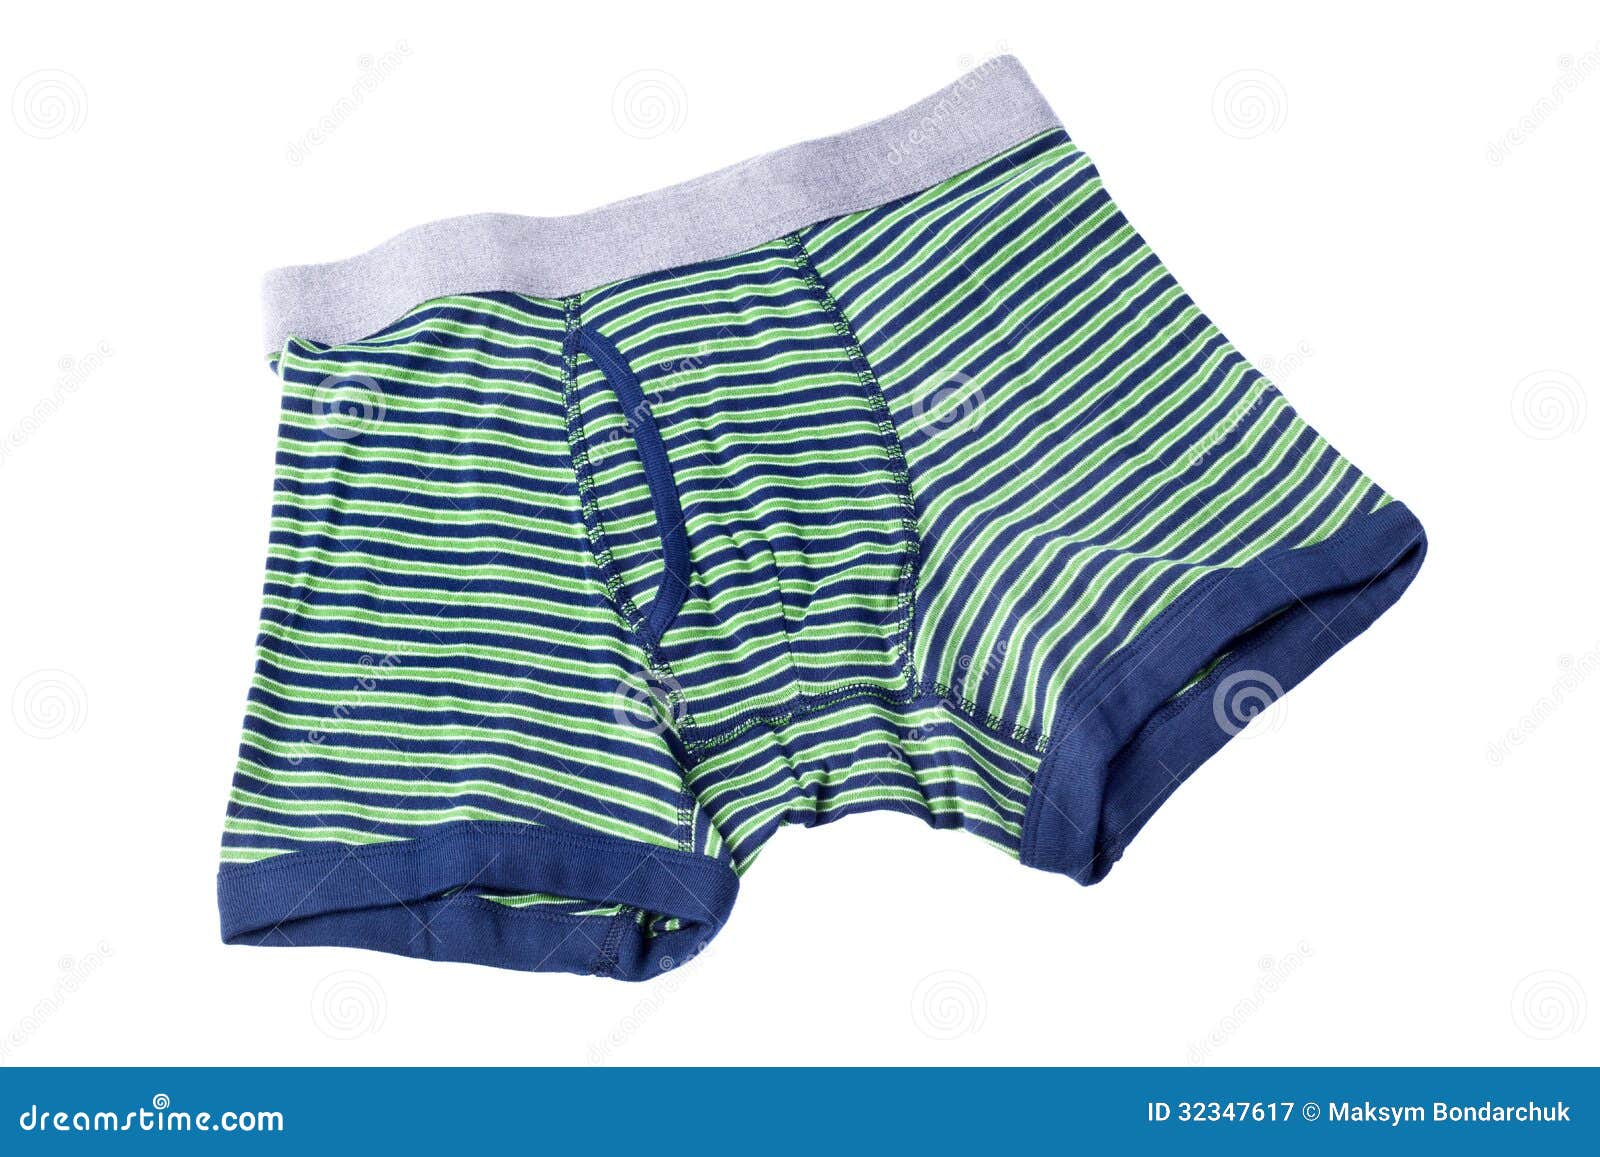 Striped Male Brief Boxers Isolated on White Stock Image - Image of ...